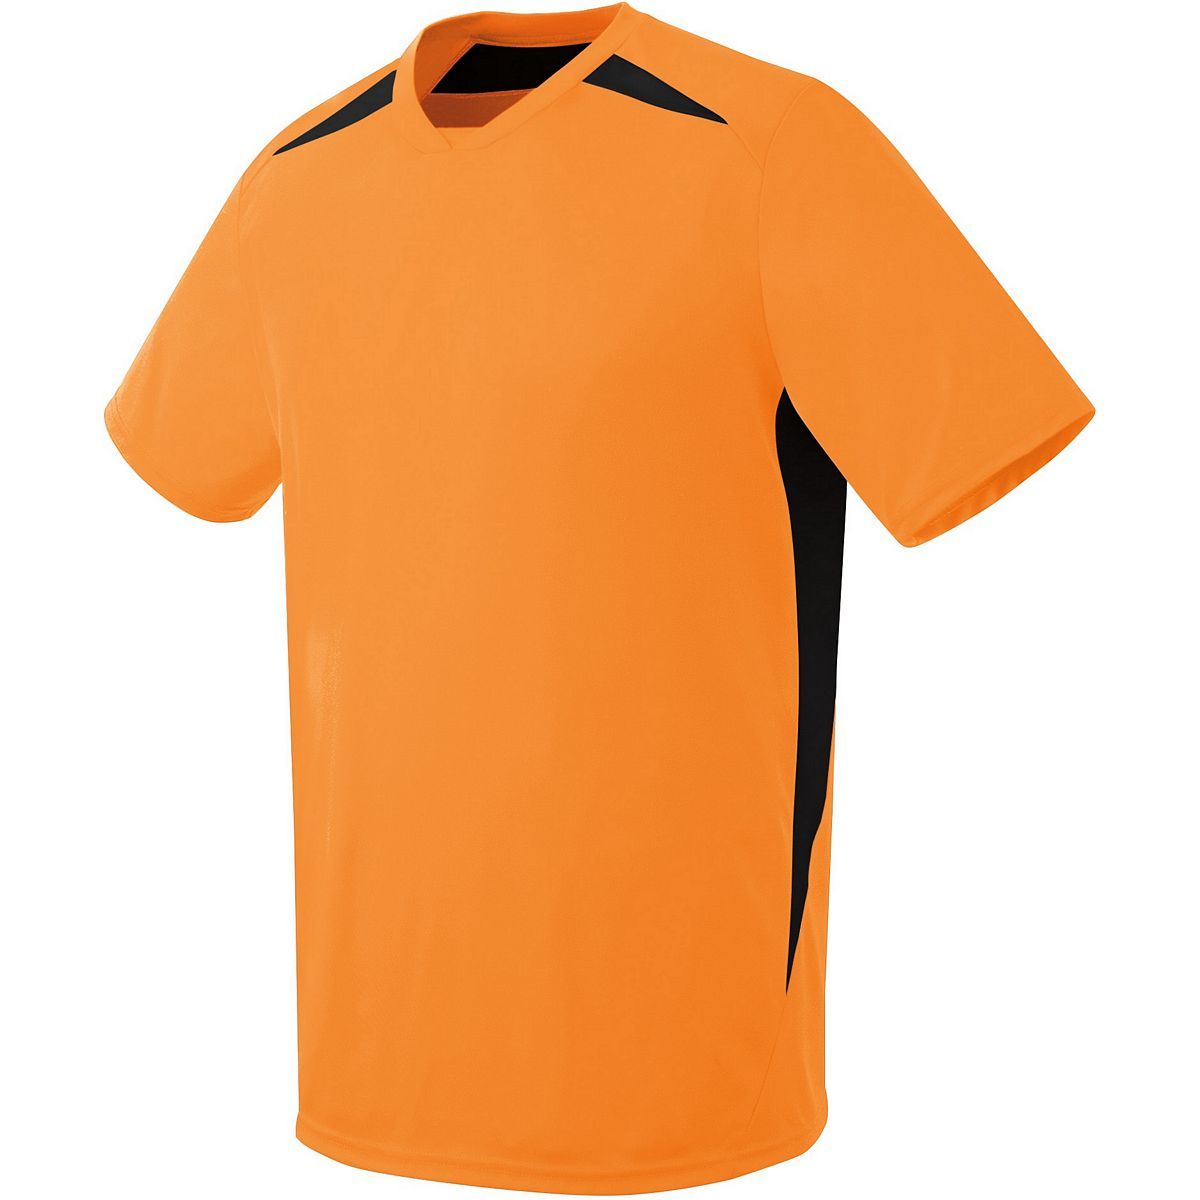 High 5 Youth Hawk Jersey in Power Orange/Black  -Part of the Youth, Youth-Jersey, High5-Products, Soccer, Shirts, All-Sports-1 product lines at KanaleyCreations.com